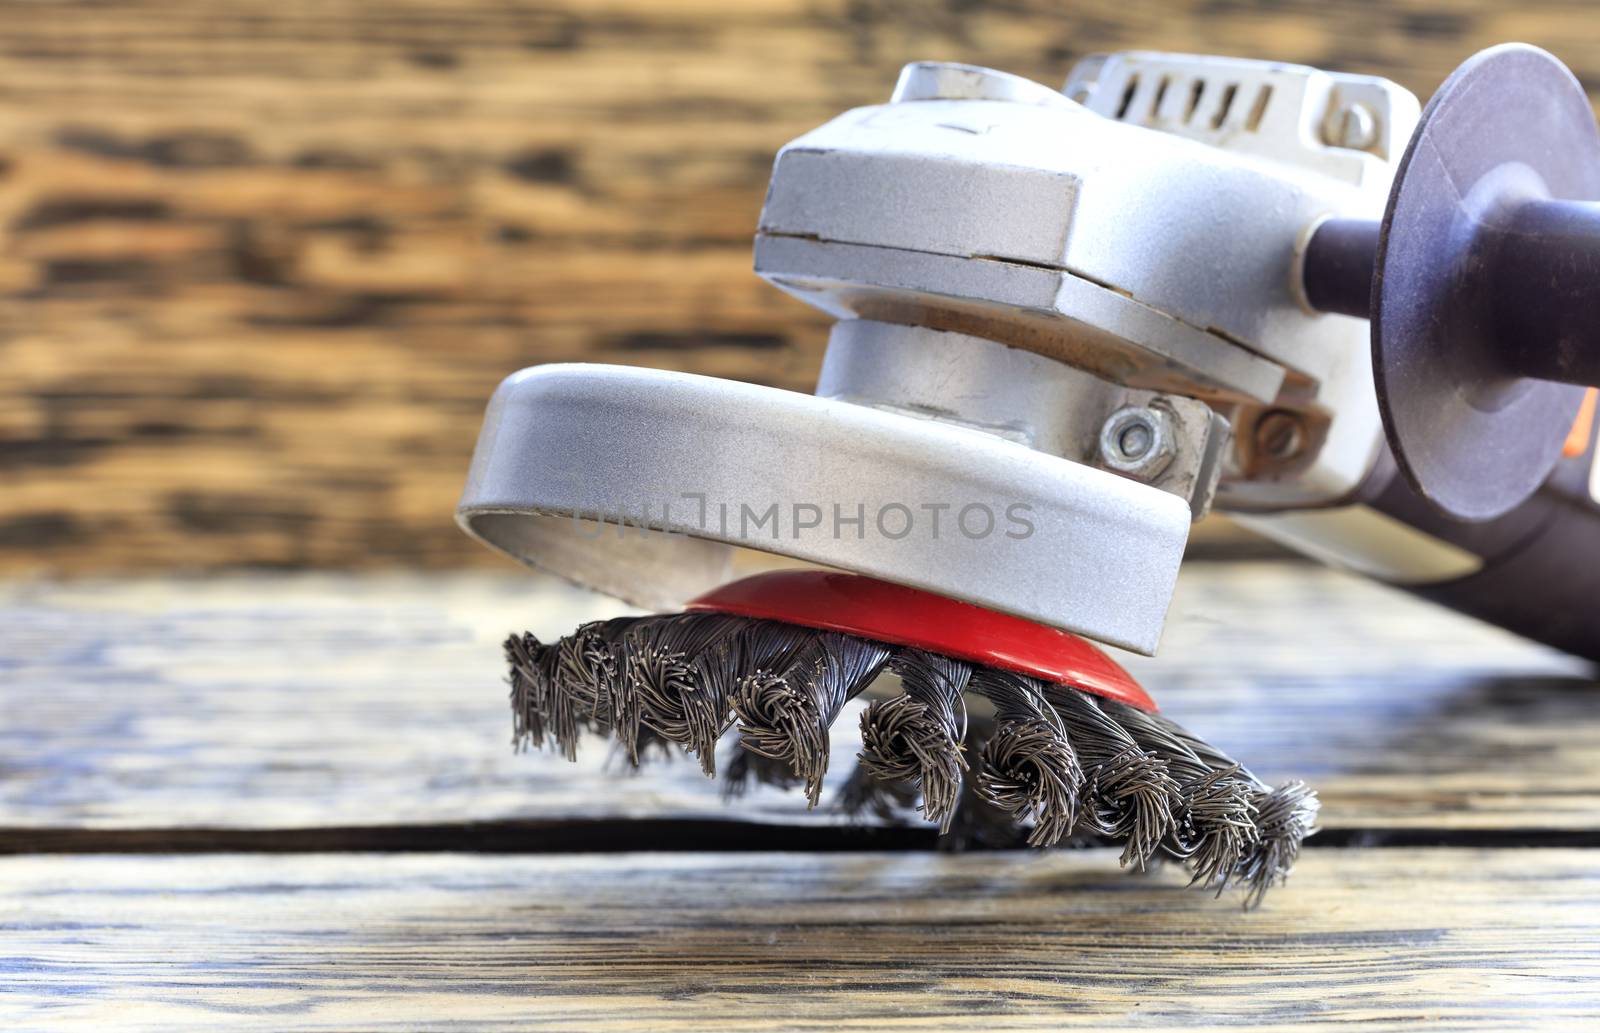 Angle grinder with abrasive wire brushes lies on the background of a wooden table.